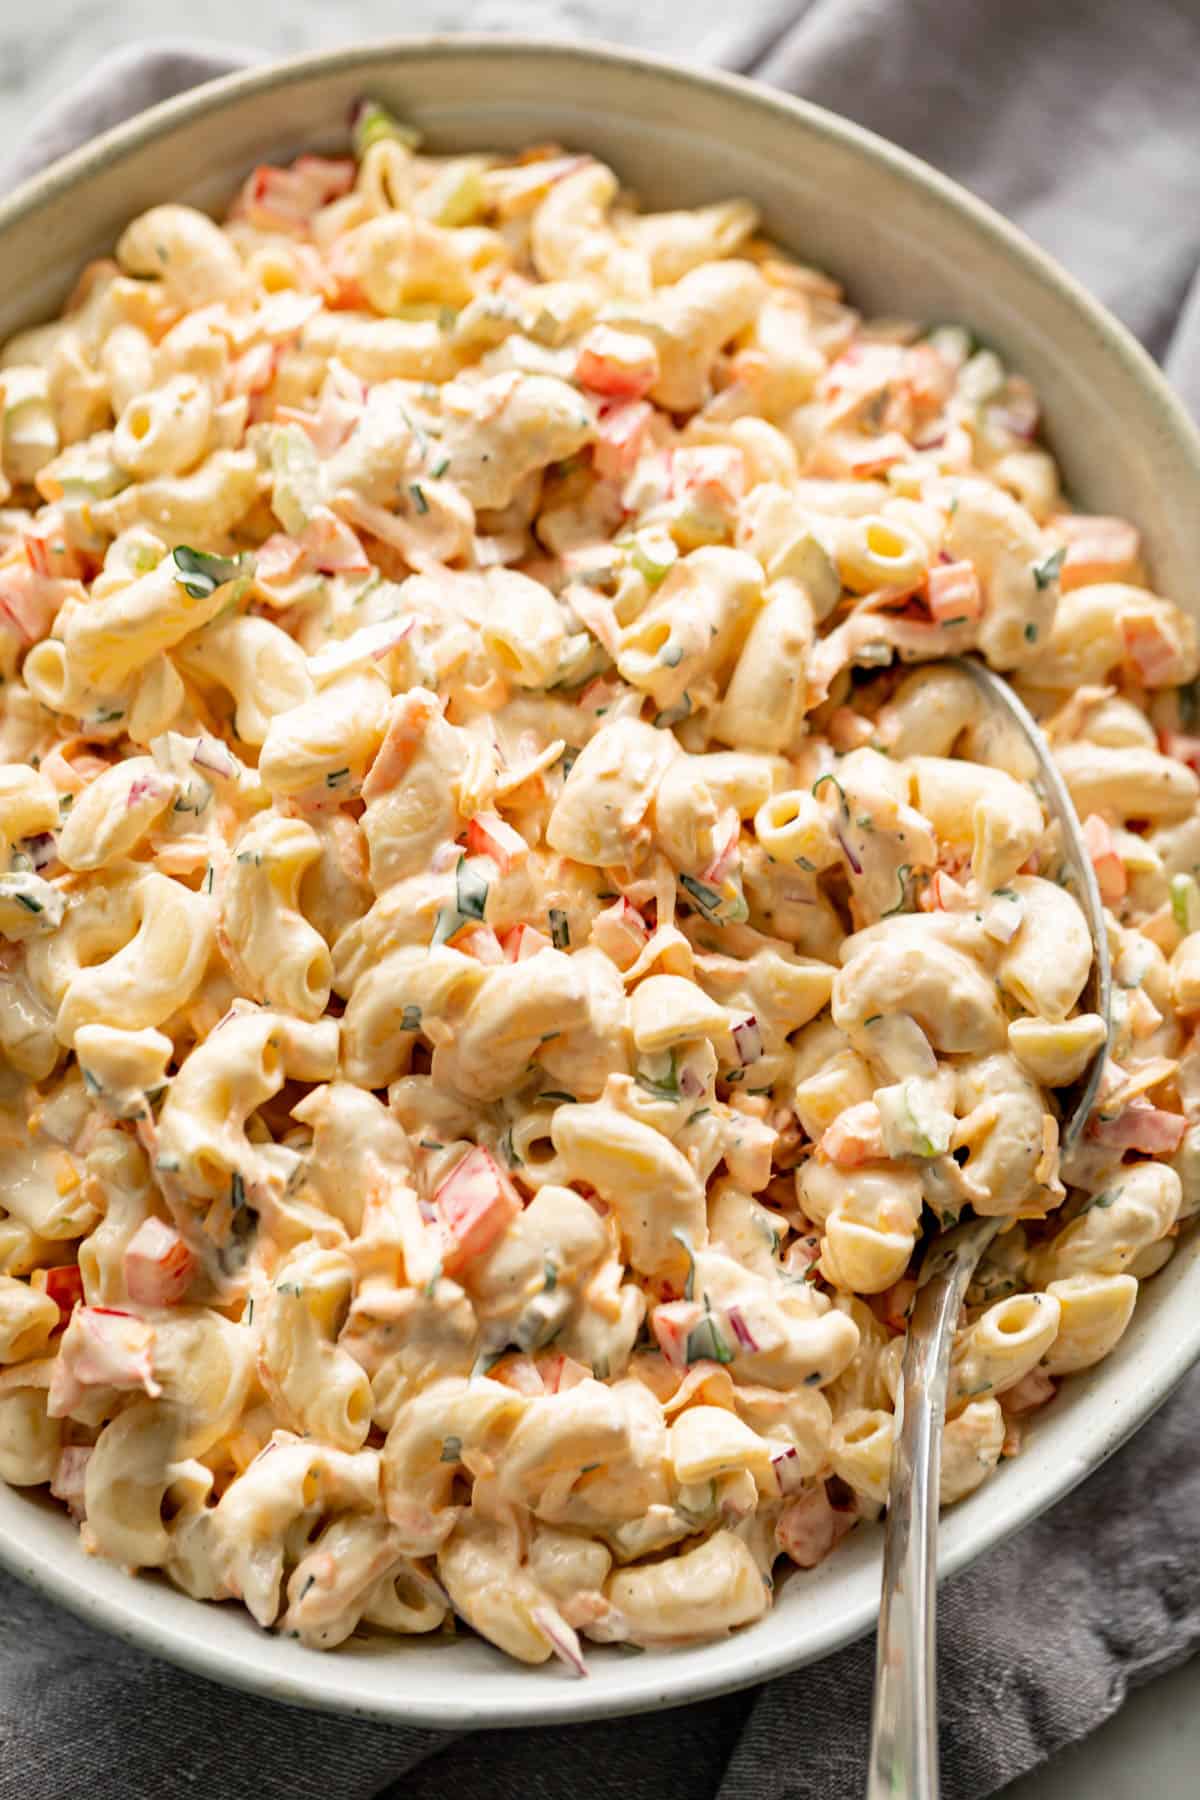 Macaroni Salad is quick to throw together and so DELICIOUS! Served in a light grey bowl on a grey linen cloth with a spoon for scooping.